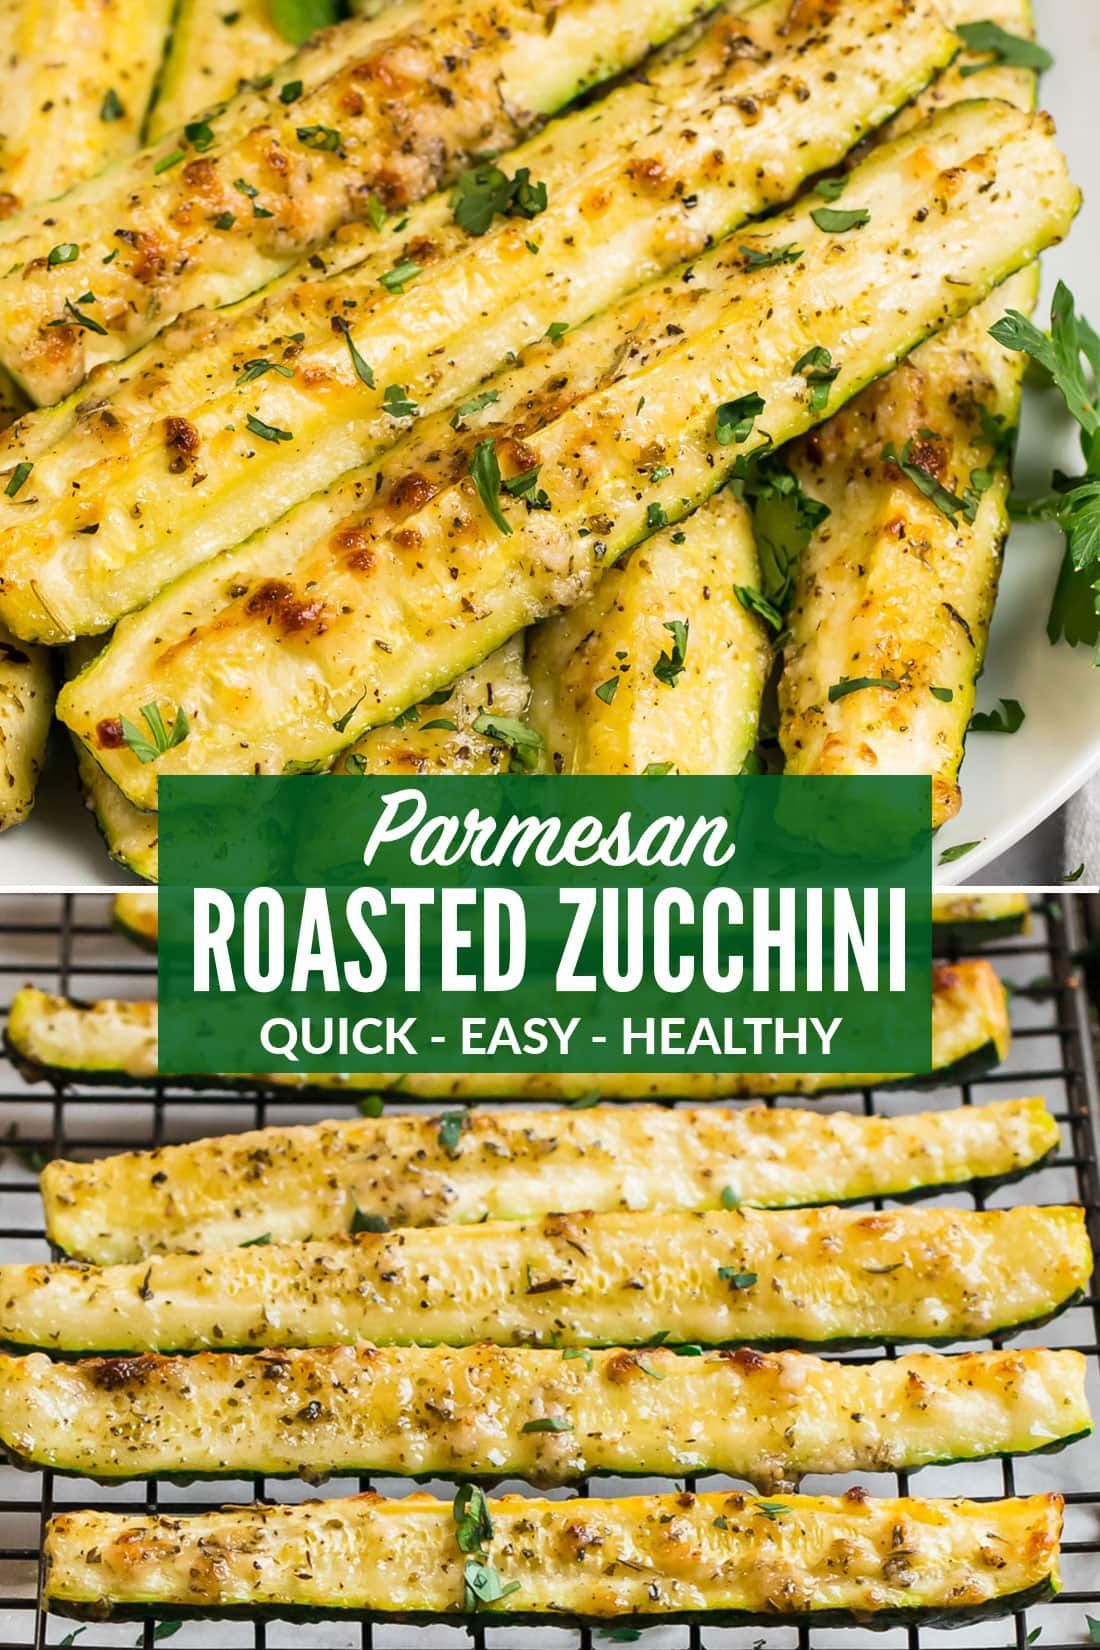 Roasted Zucchini -   17 healthy recipes Sides dishes ideas